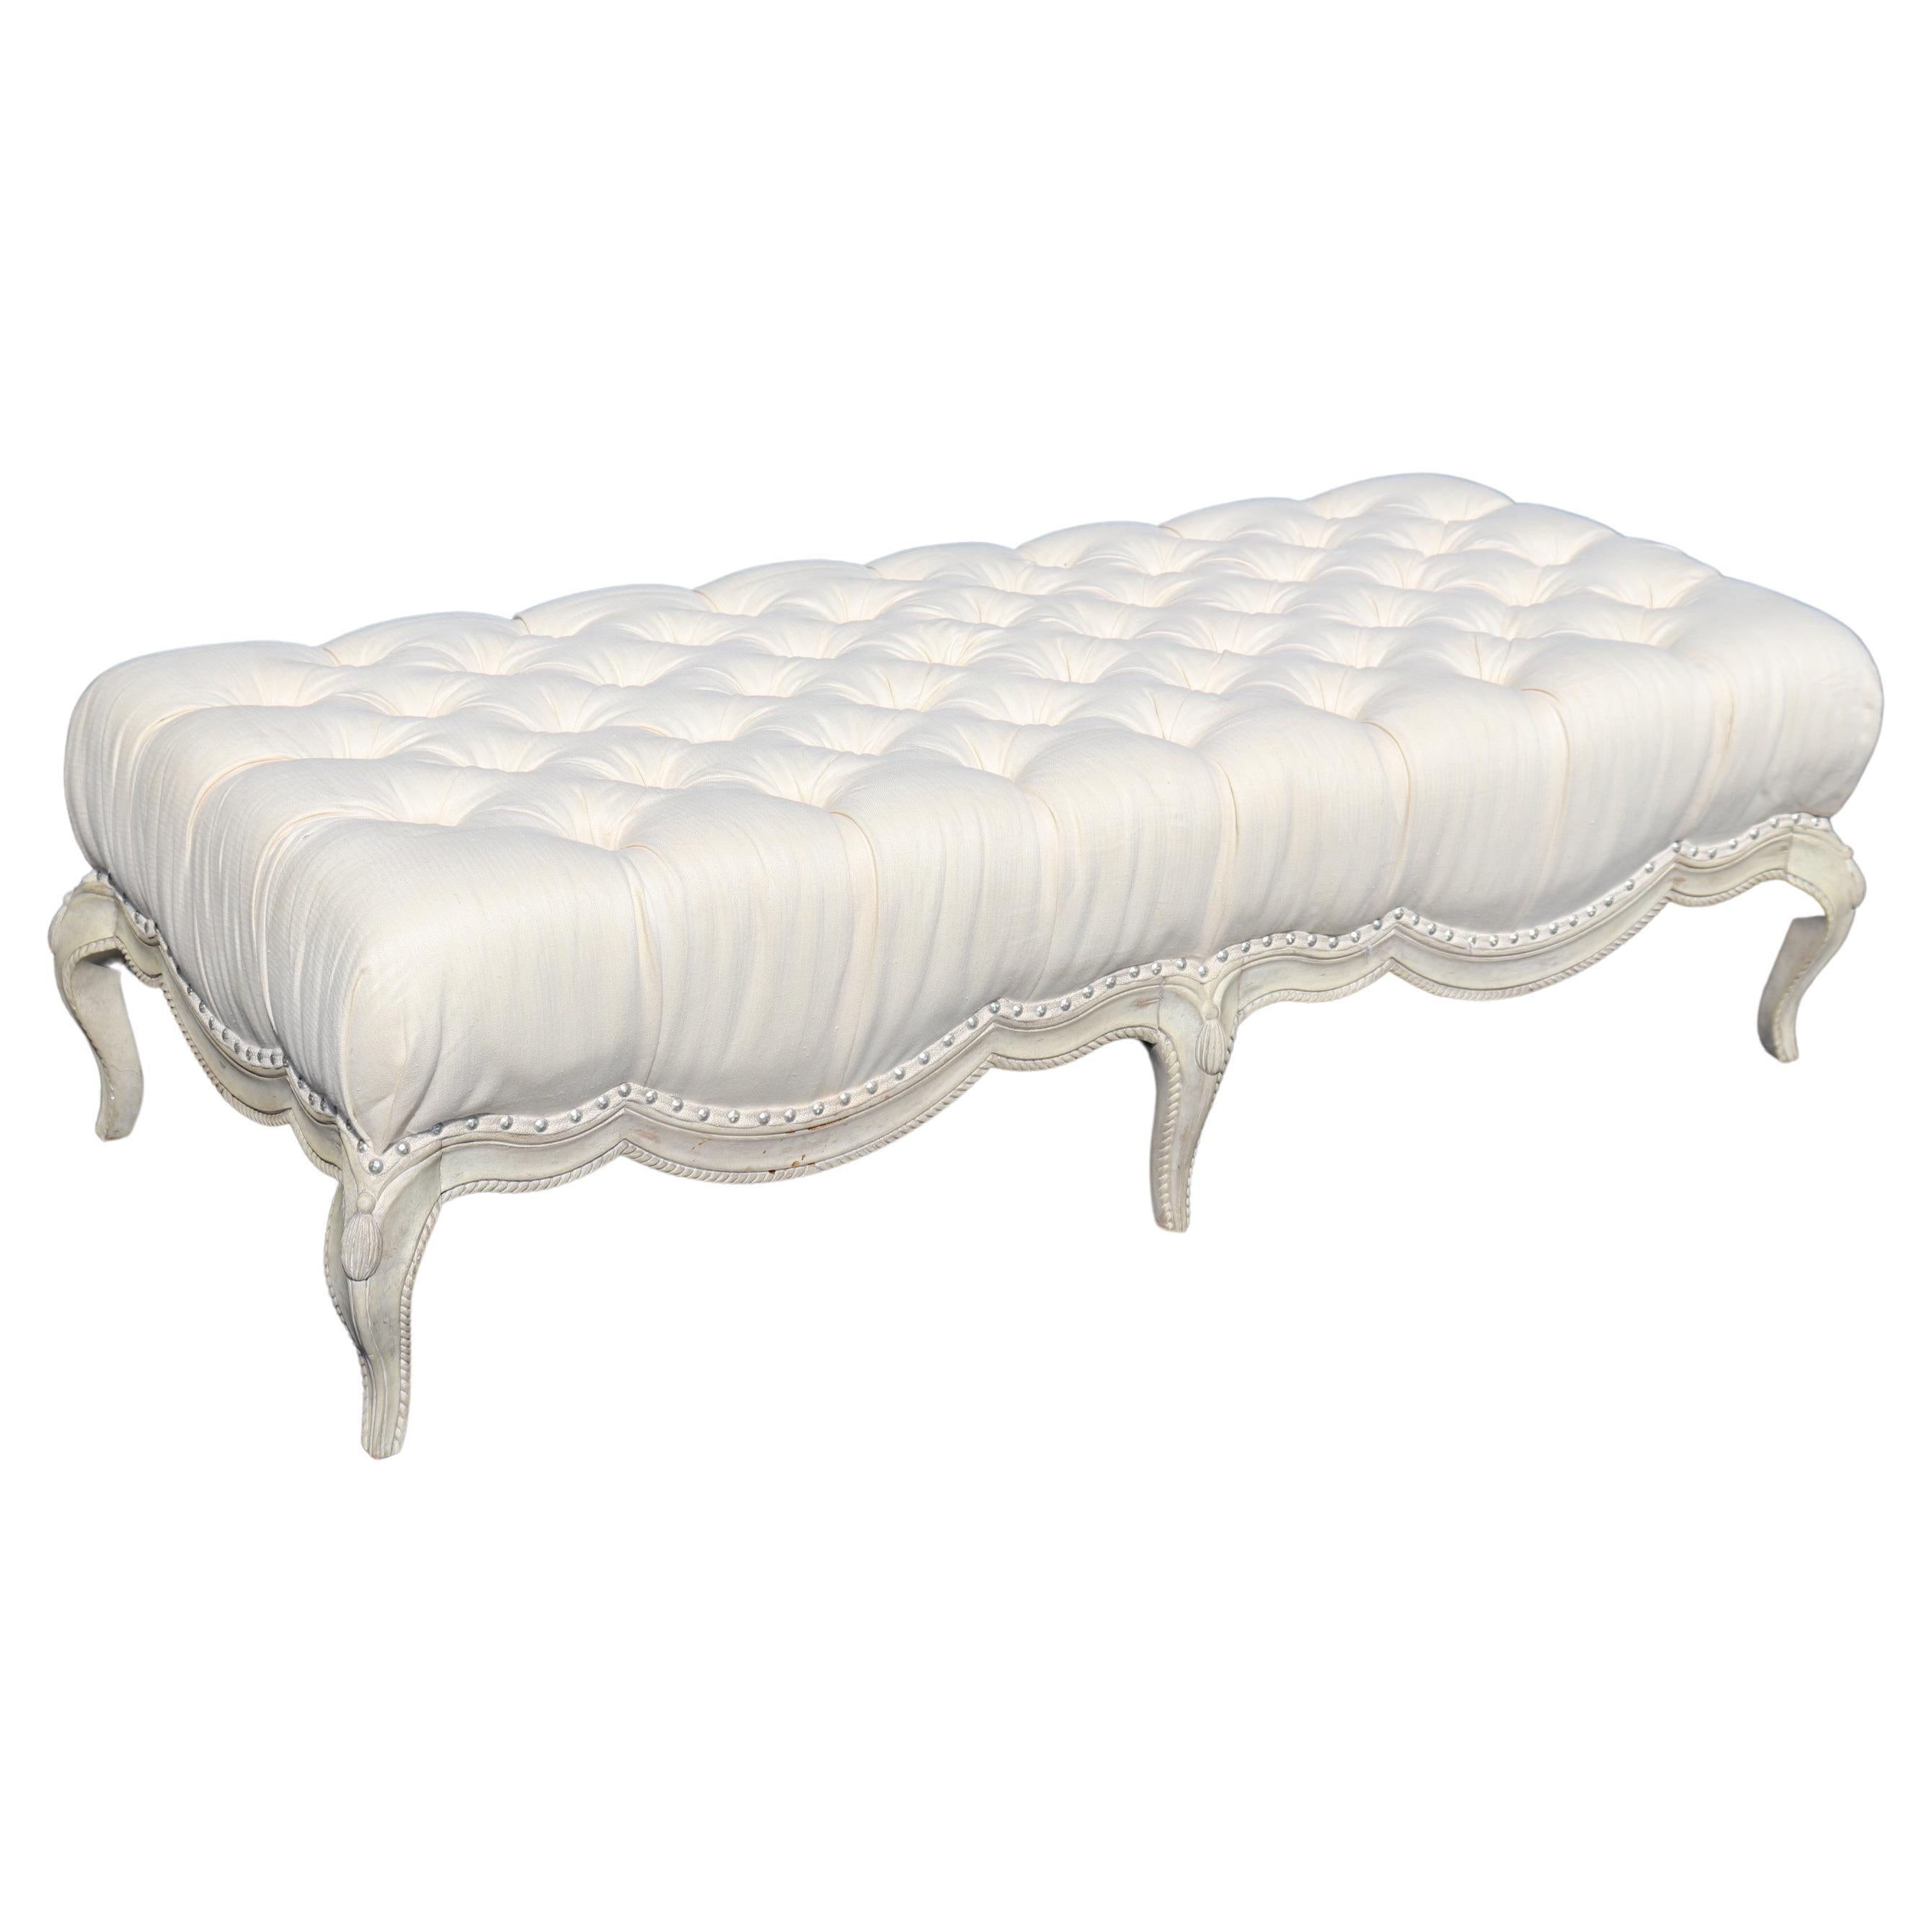 Tufted Fancy Formal French Louis XV Rope and Tassel Window Bench Ottoman